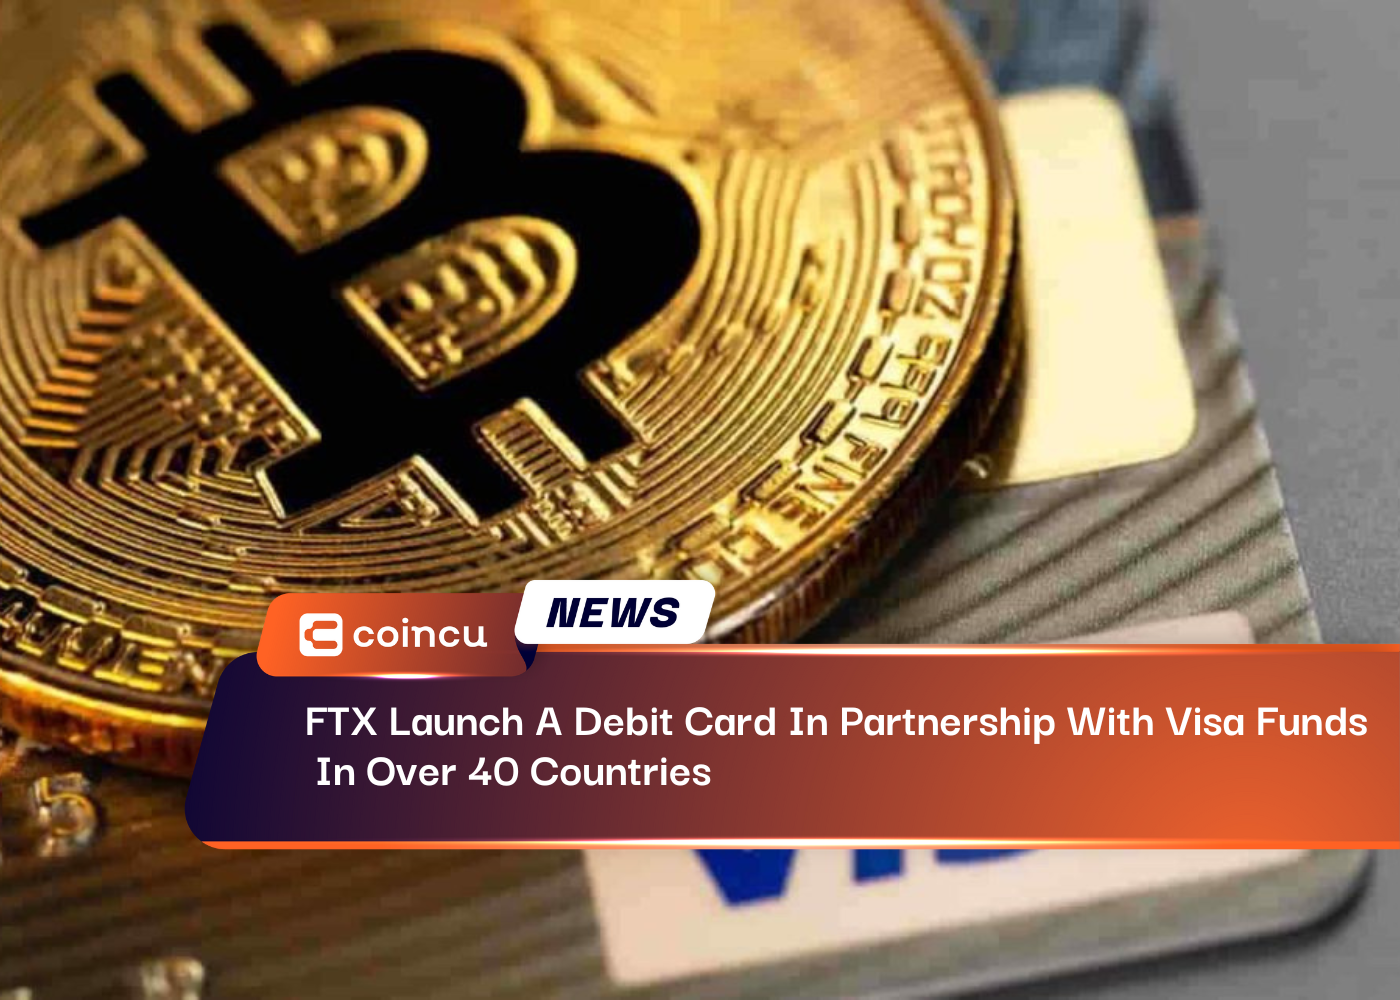 FTX Will Launch A Debit Card In Partnership With Visa Funds In Over 40 Countries